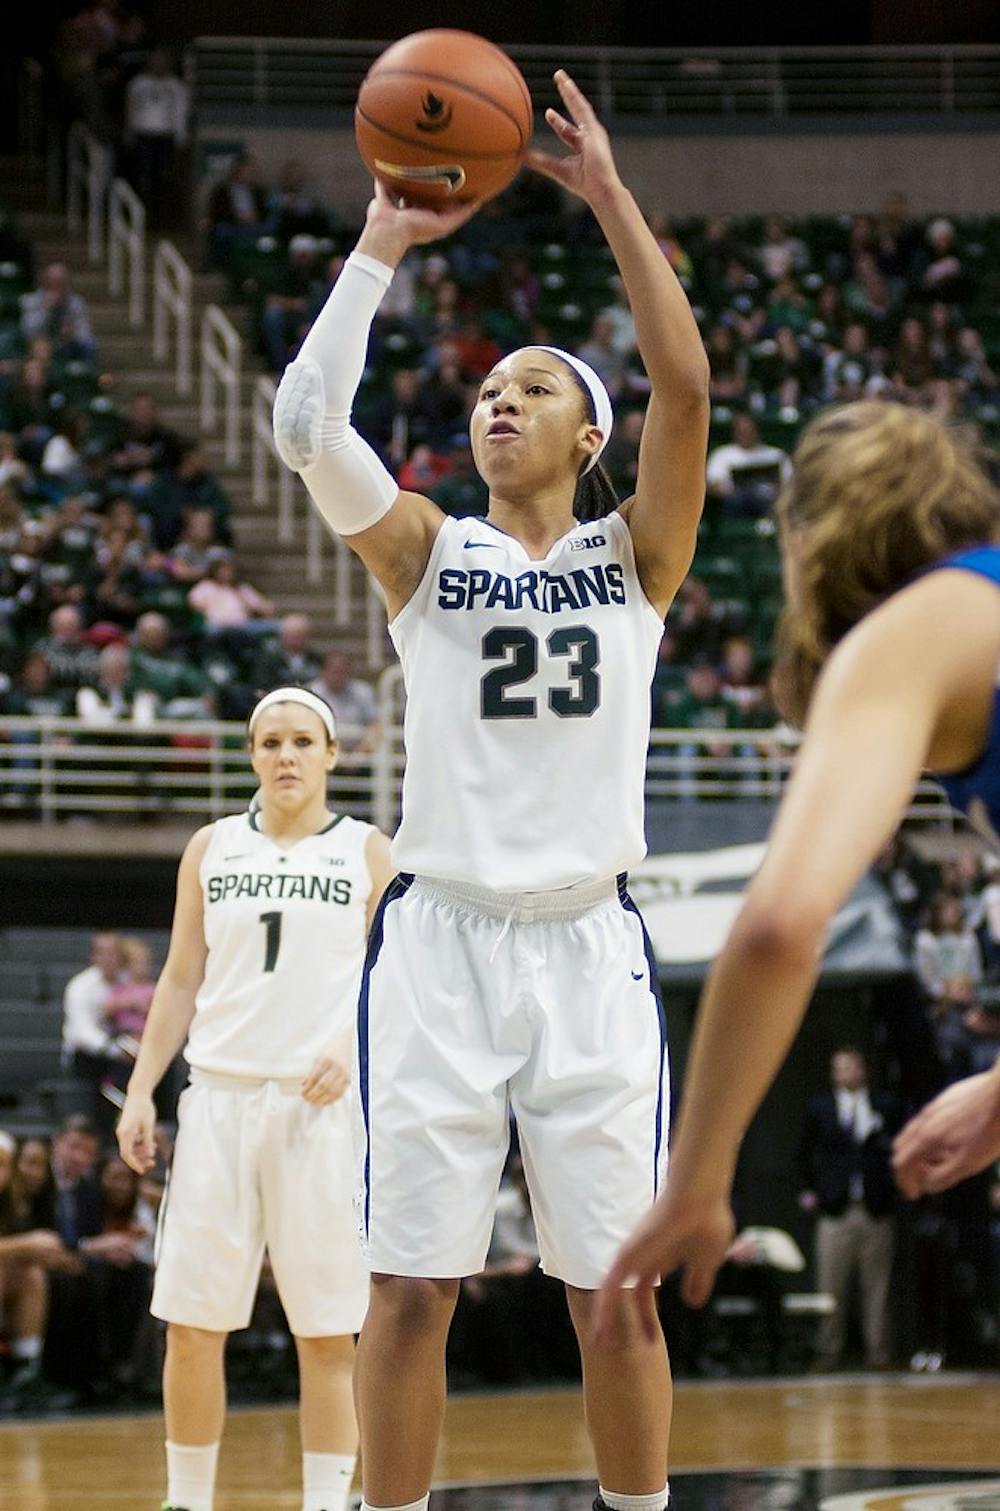 	<p>Redshirt freshman guard Aerial Powers shoots a free throw Dec. 1, 2013, at Breslin Center. <span class="caps">IPFW</span> defeated <span class="caps">MSU</span>, 81-74. Margaux Forster/The State News</p>